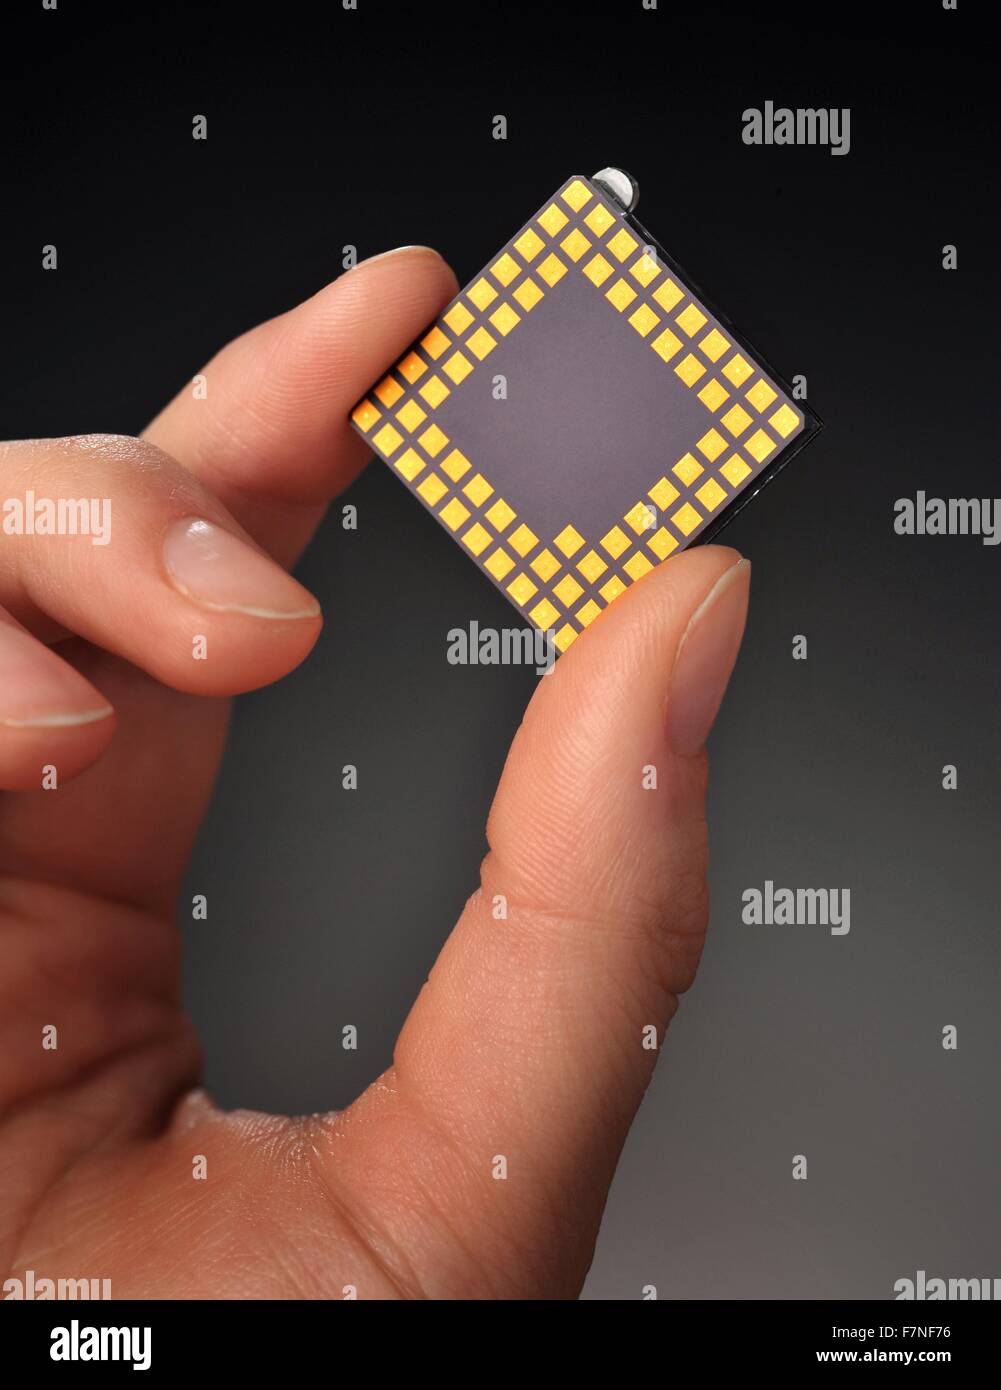 a square-shaped gene sequencing computer chip design Stock Photo